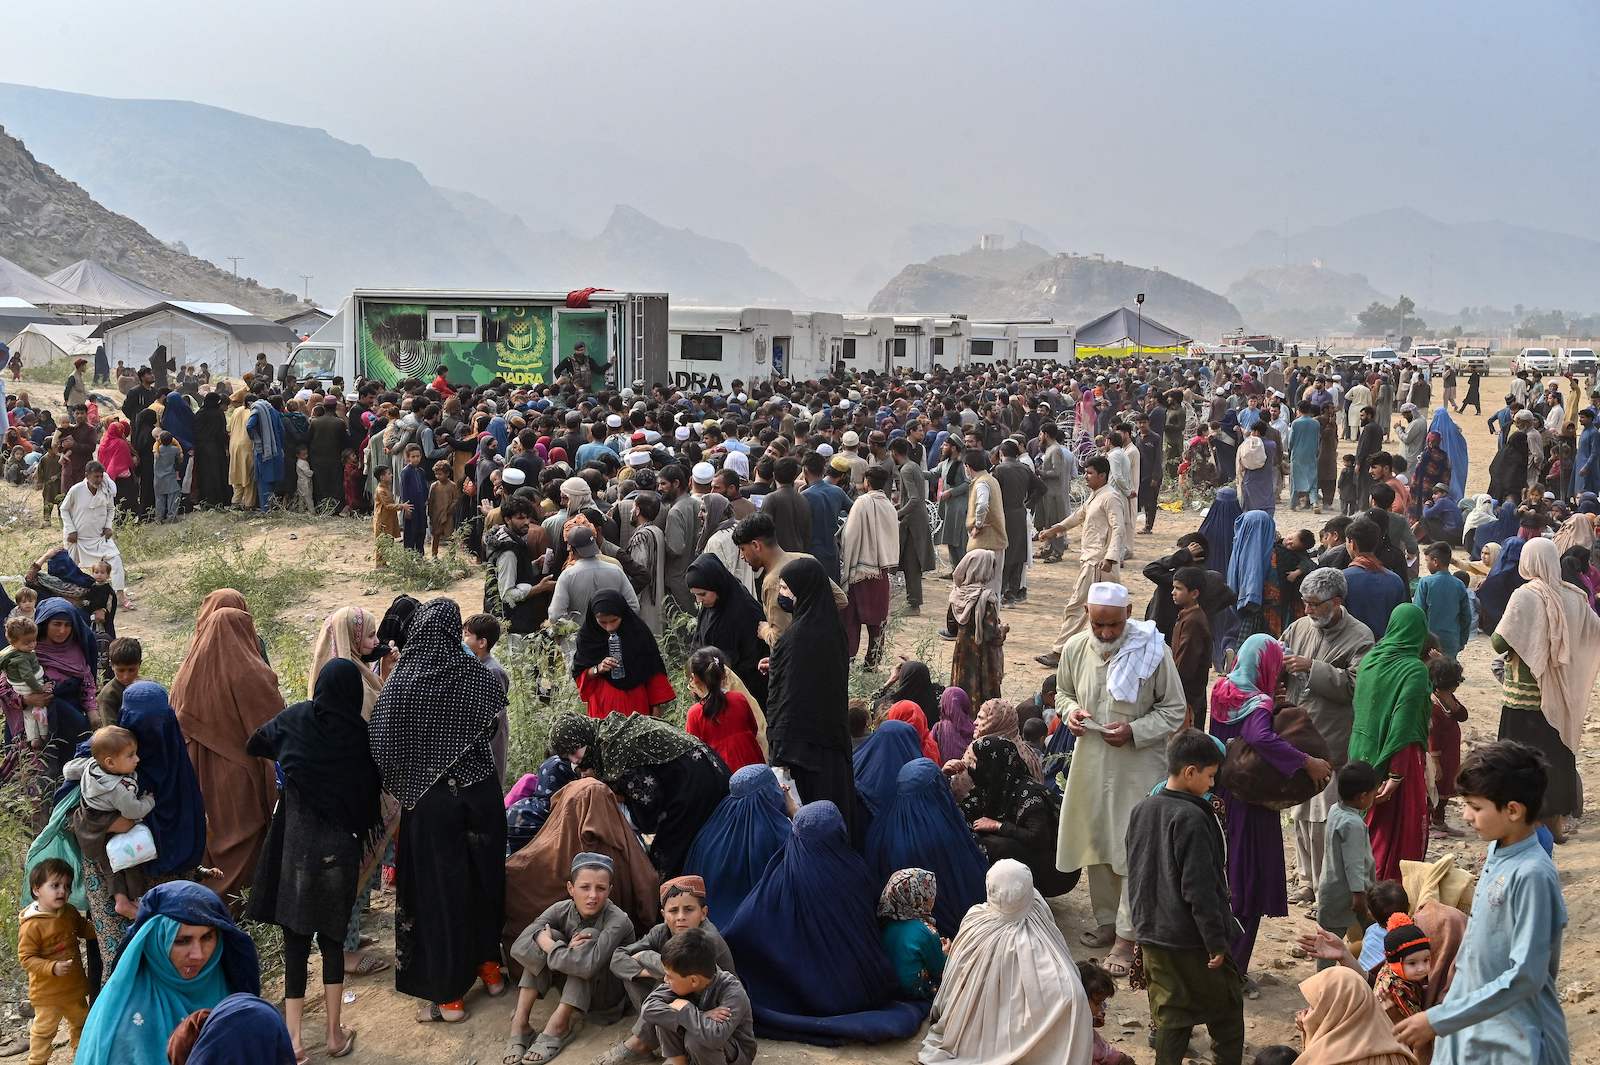 Pakistan Is Starting To Arrest And Mass Deport Thousands of Afghan Refugees Back To The Taliban-Controlled Afghanistan